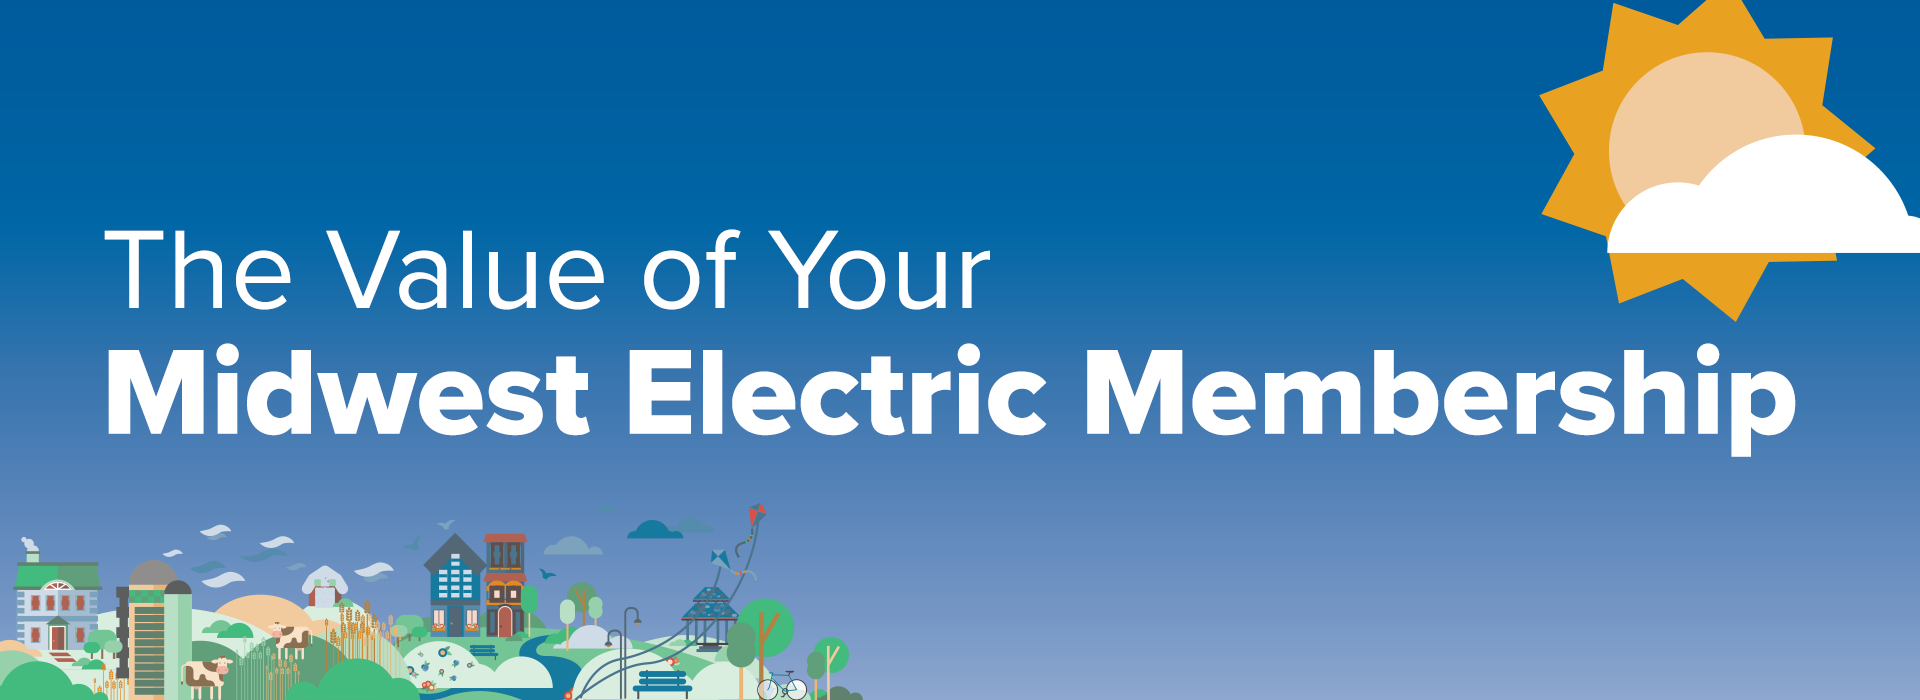 The Value of Your Midwest Electric Membership